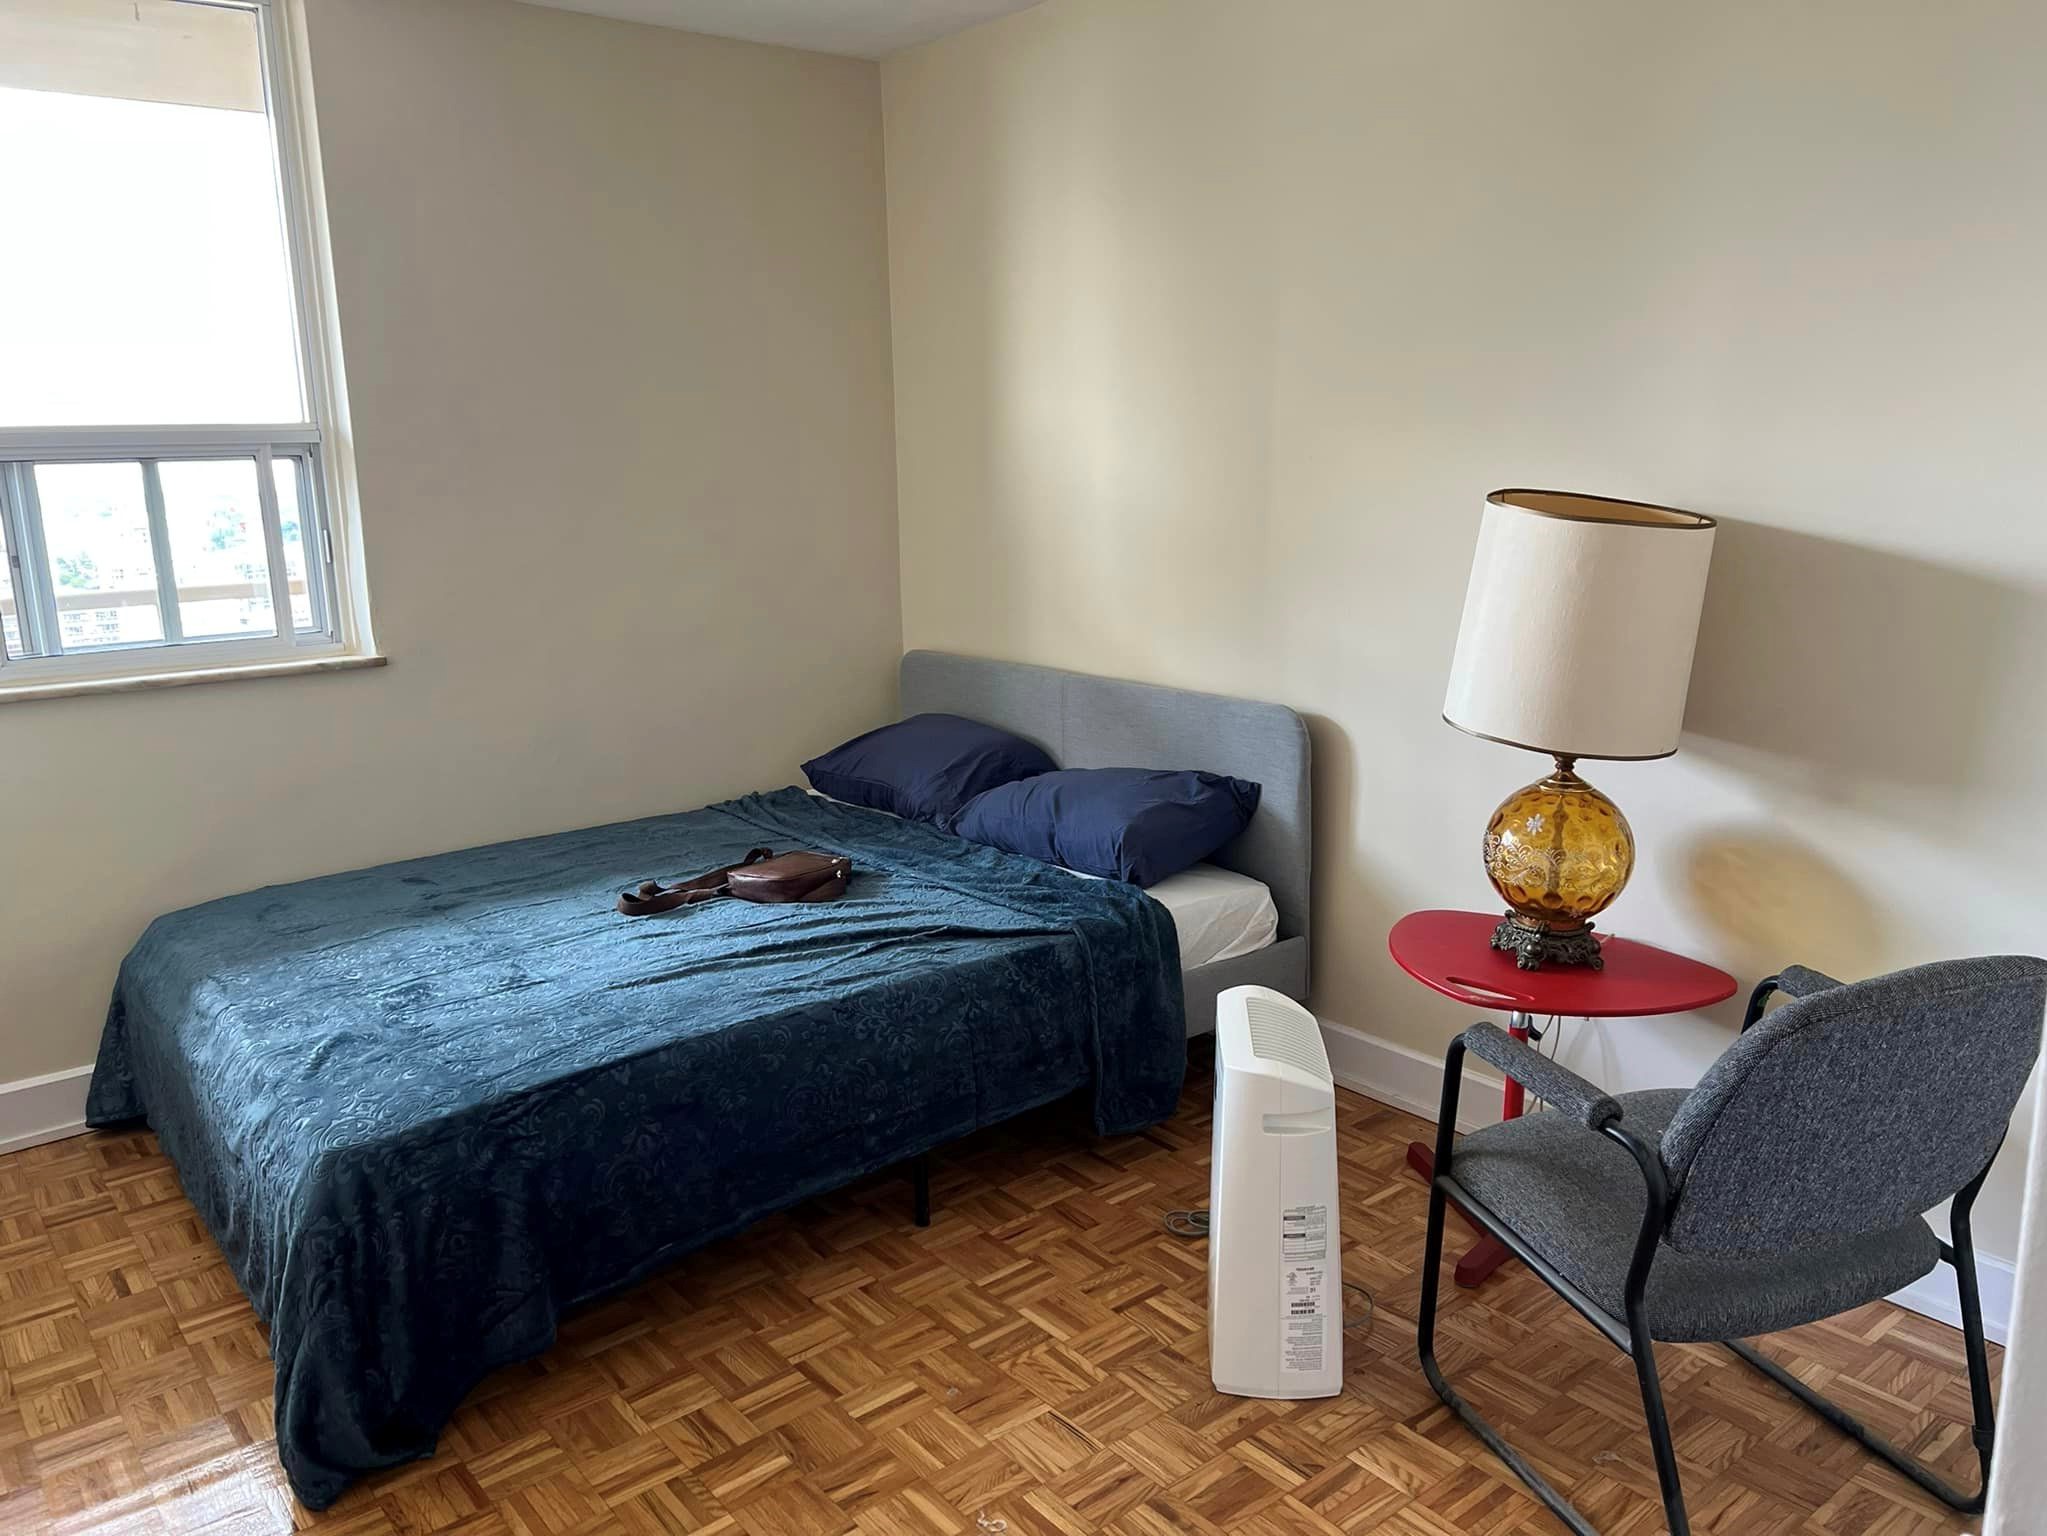 A bedroom with a single bed, side table, lamp, and chair